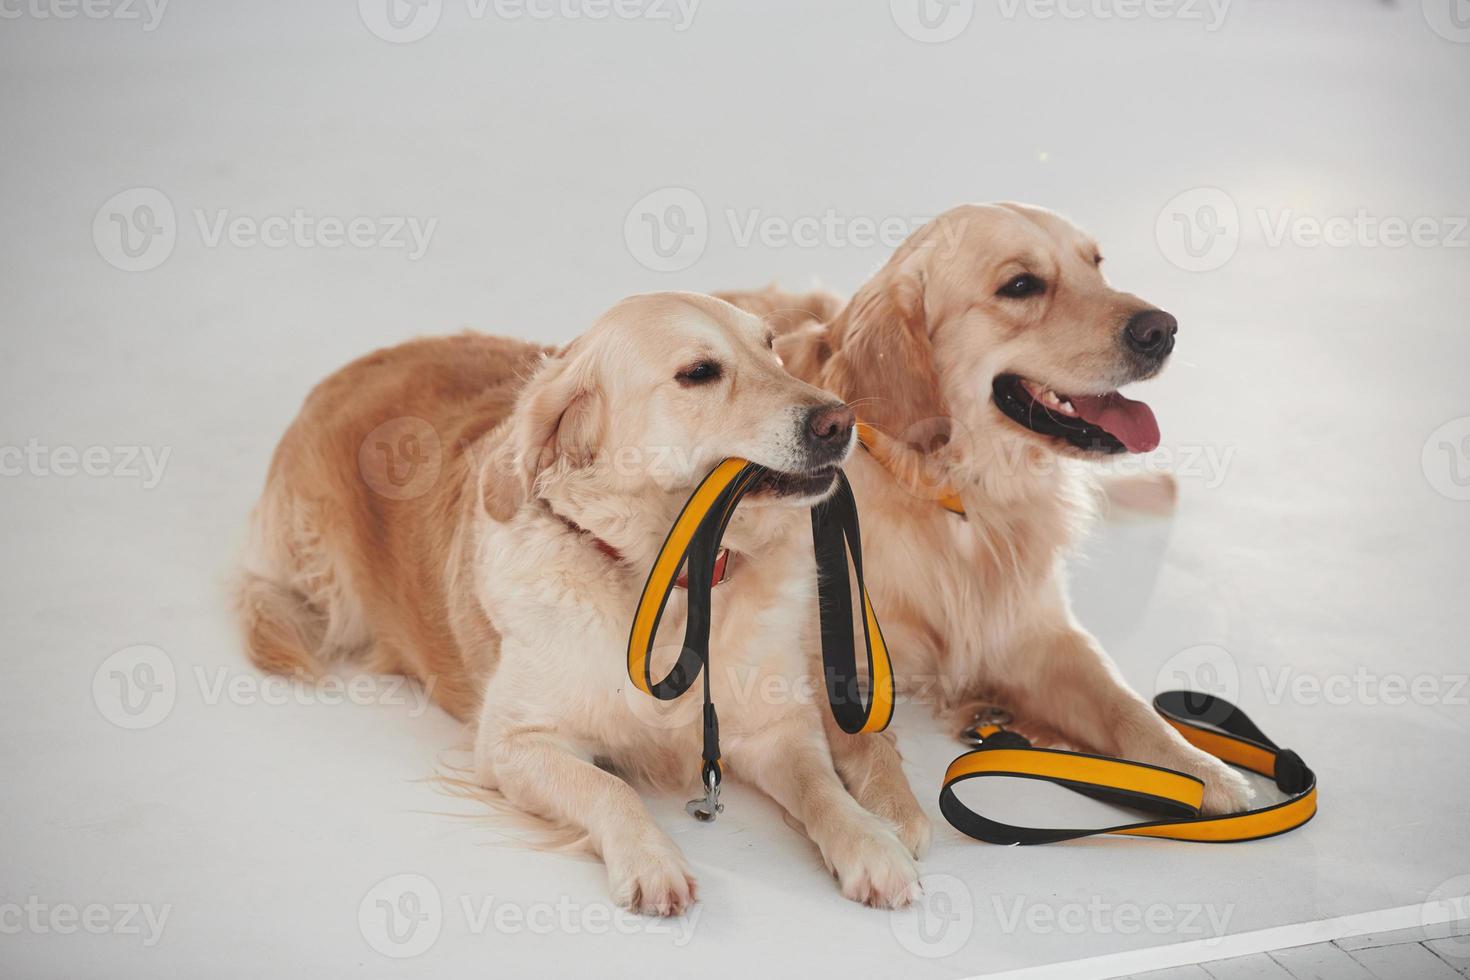 Holds leash in the mouth. Two Golden retrievers together in the studio against white background photo